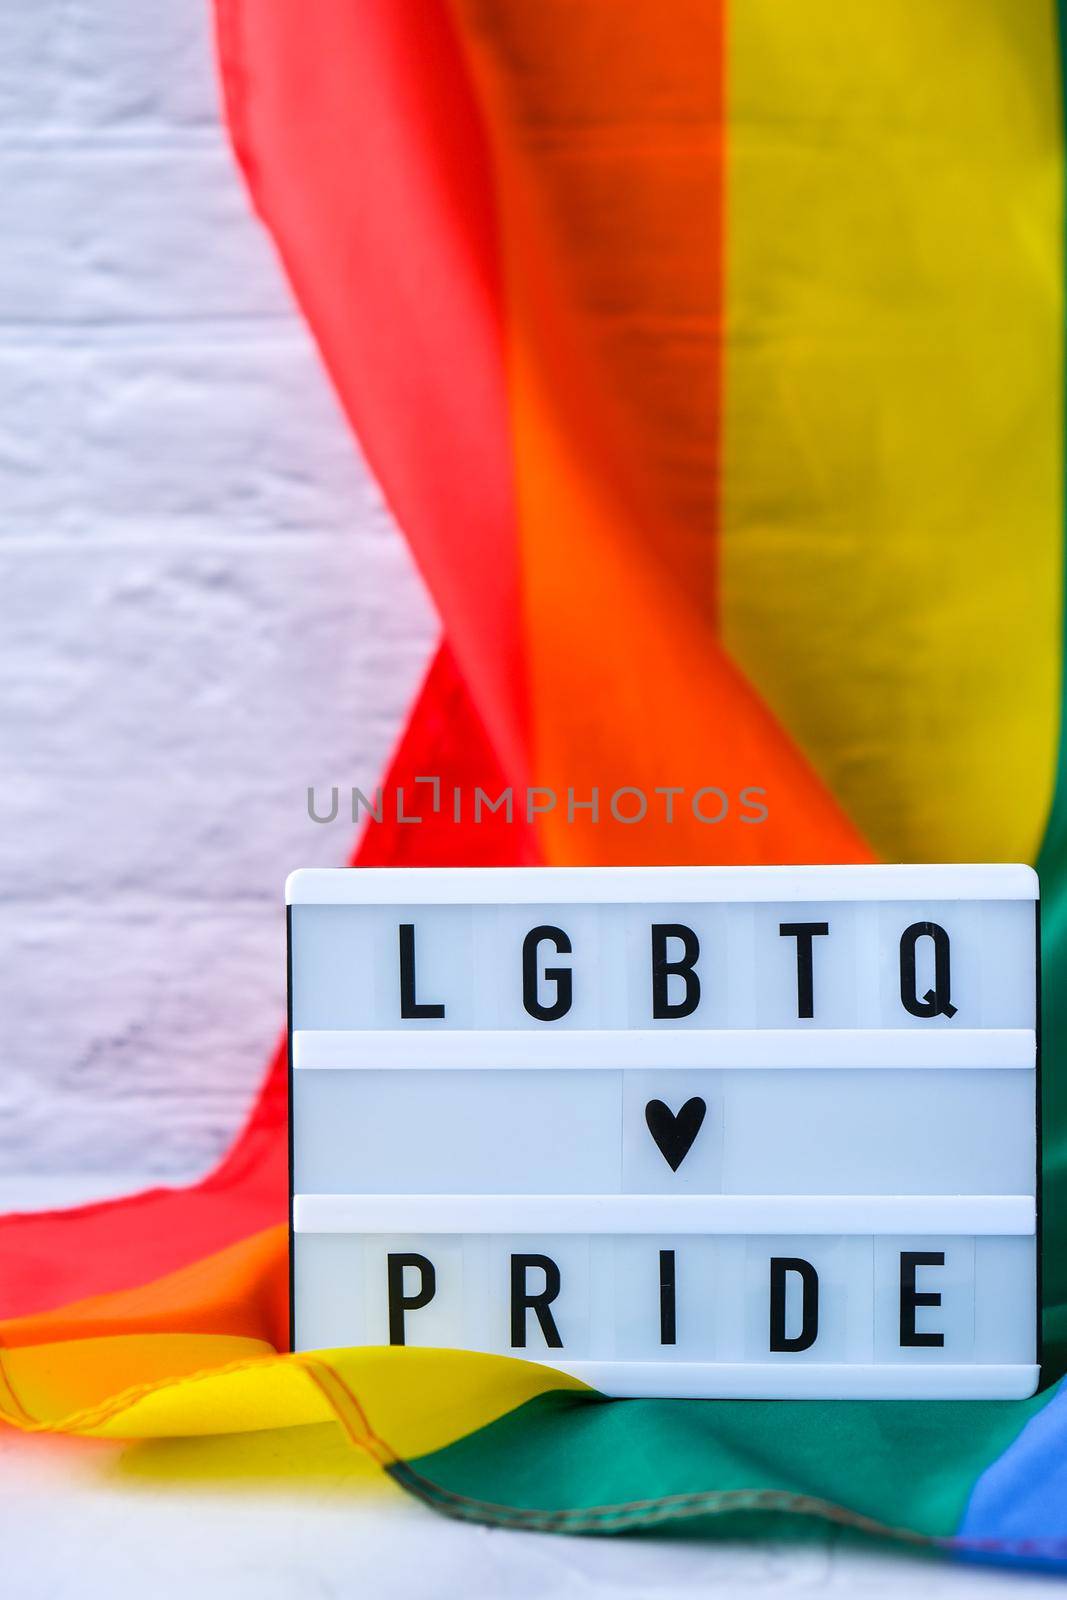 Rainbow flag with lightbox and text LGBTQ PRIDE. Rainbow lgbtq flag made from silk material. Symbol of LGBTQ pride month. Equal rights. Peace and freedom. Support LGBTQ community